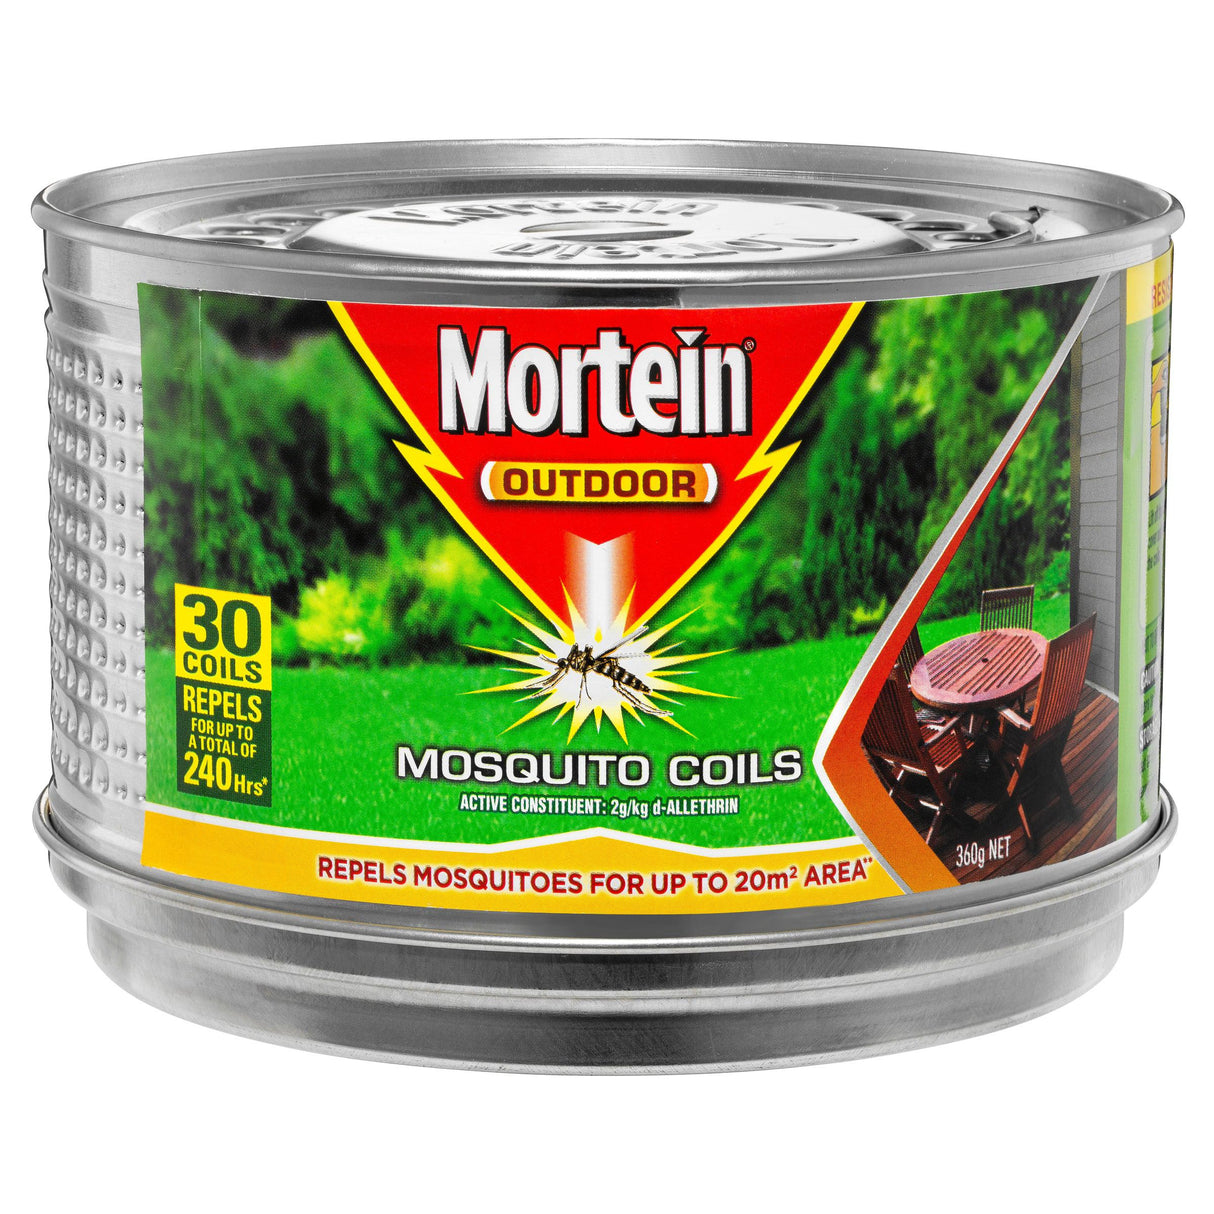 Mortein Mosquito Coils Value Pack 30 Pack